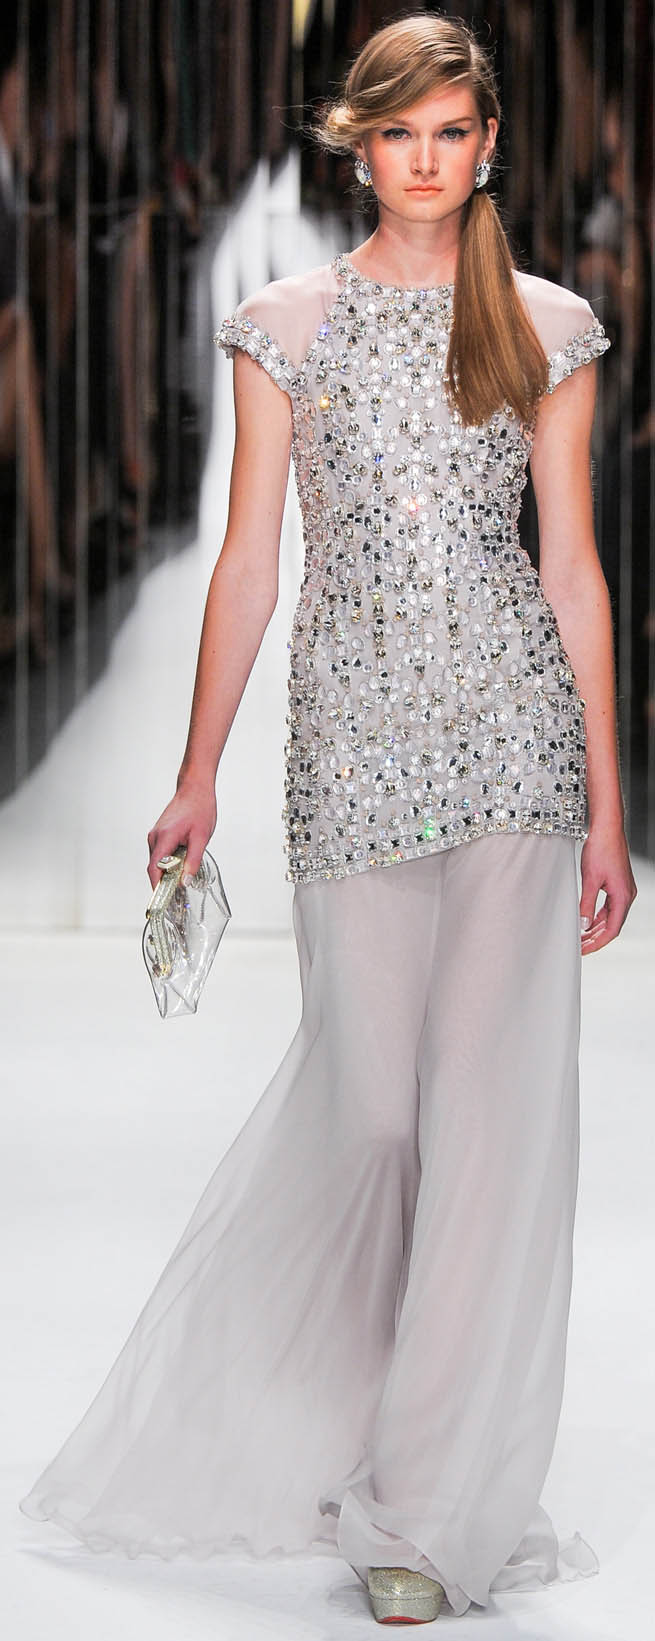 Jenny Packham Spring Summer 2013 Ready To Wear Collection